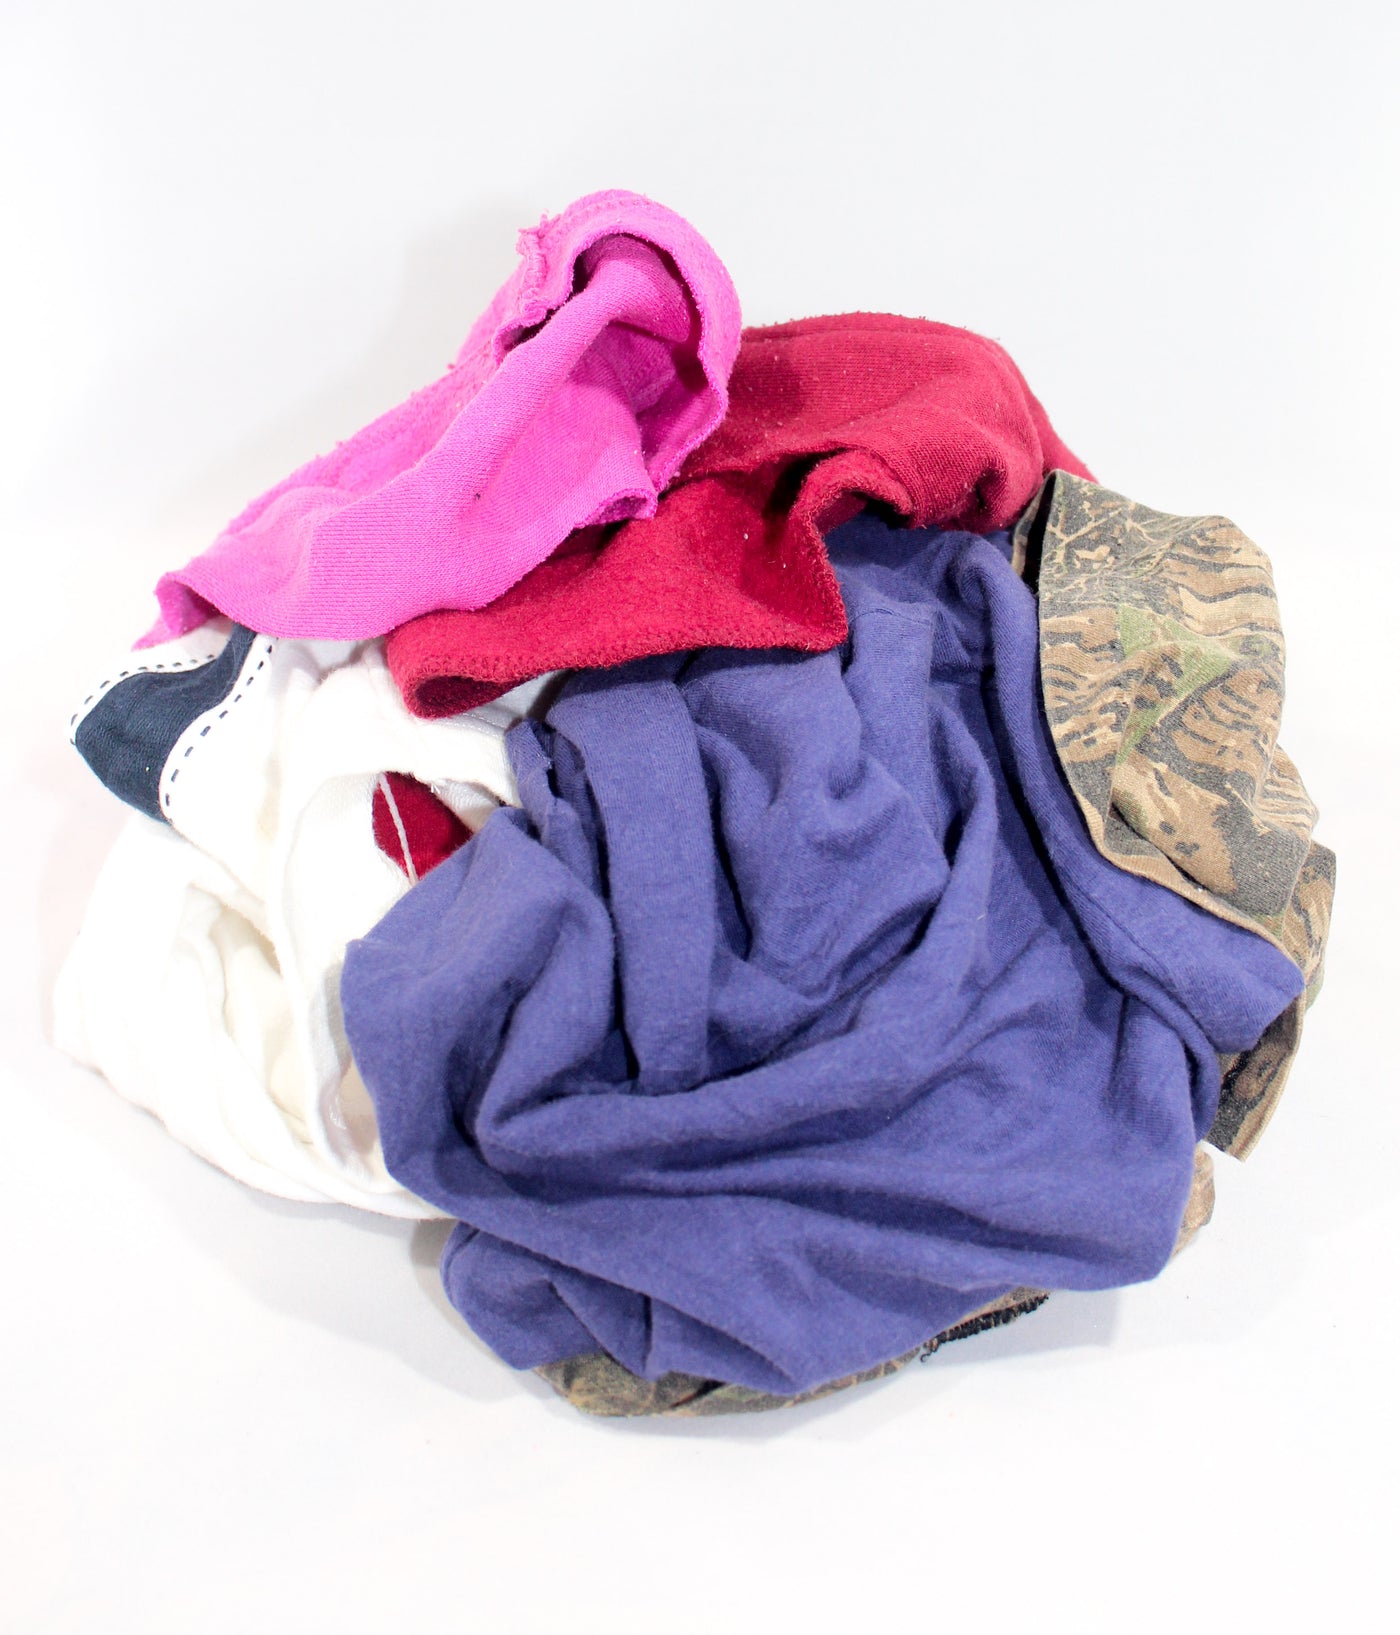 The Rag Company takes microfiber cloth sales to the next level